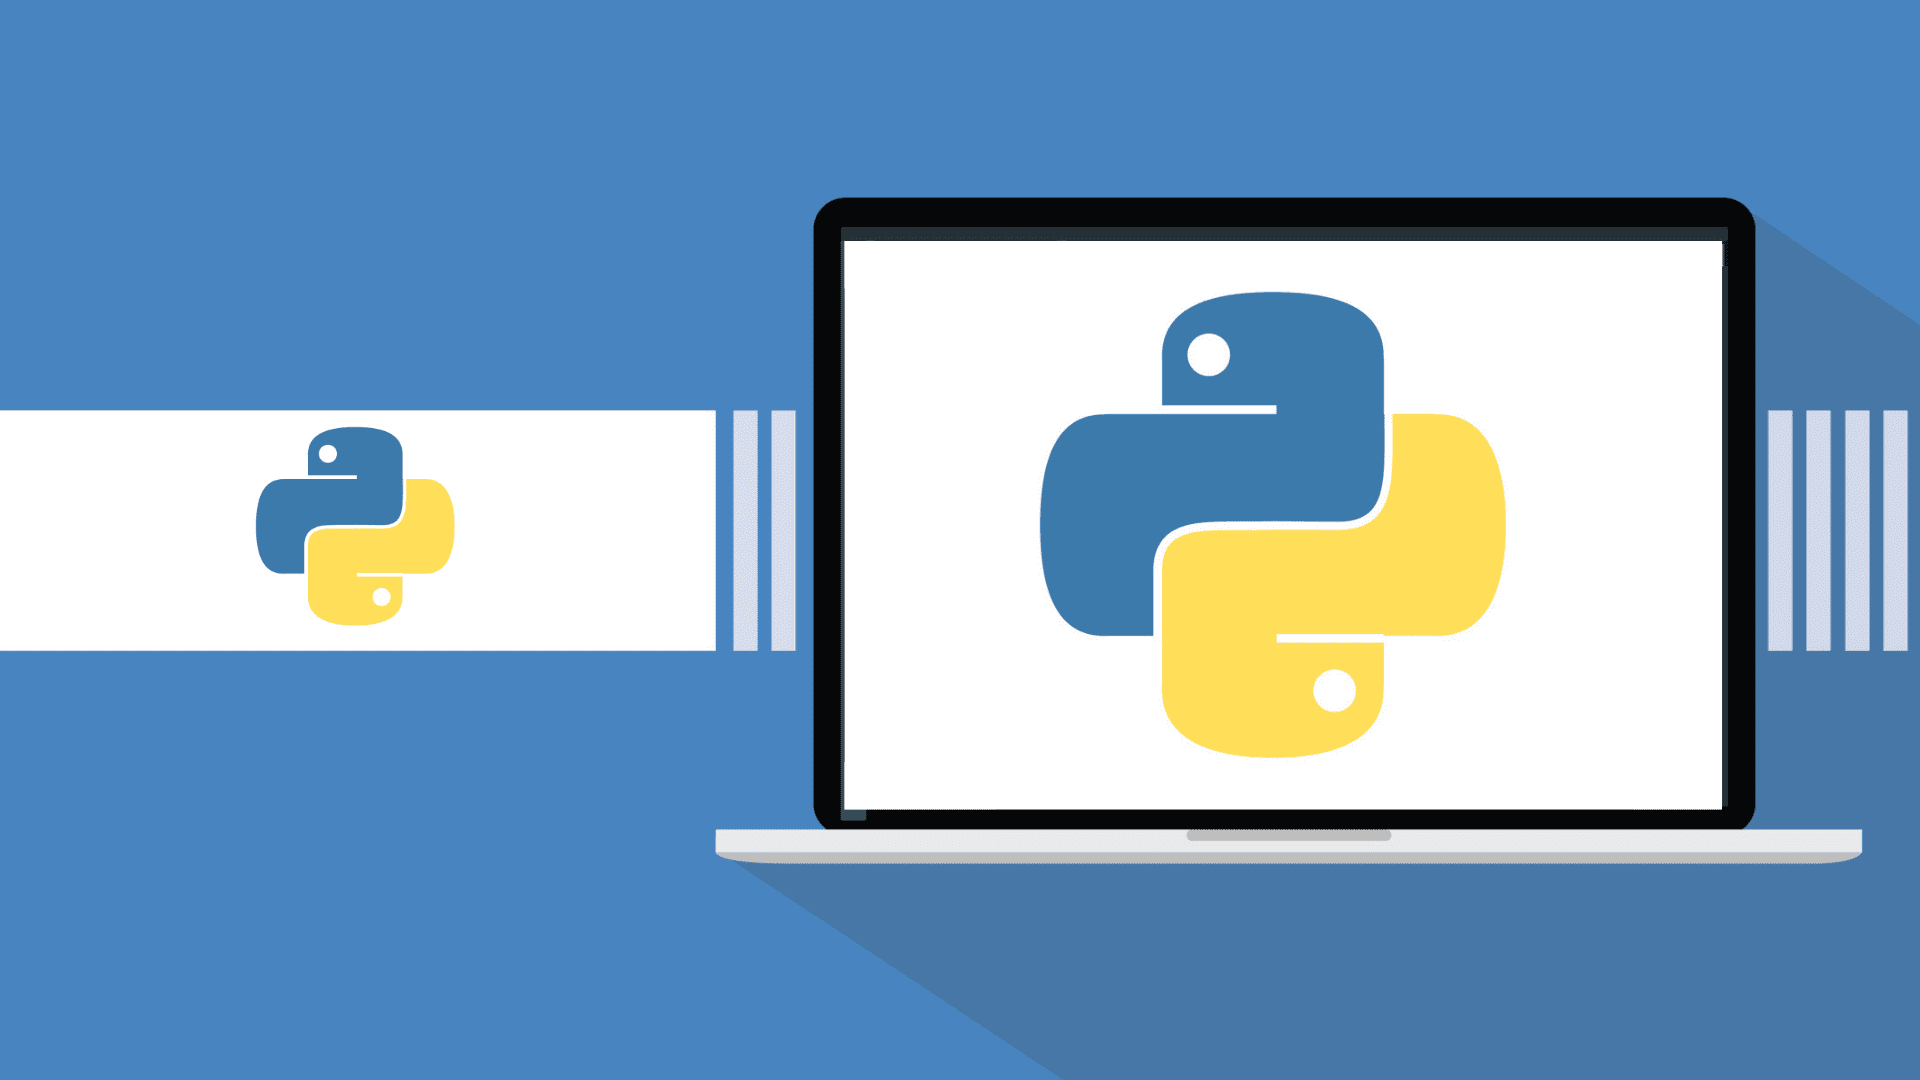 Learn Python Programming from A-Z - Level 3